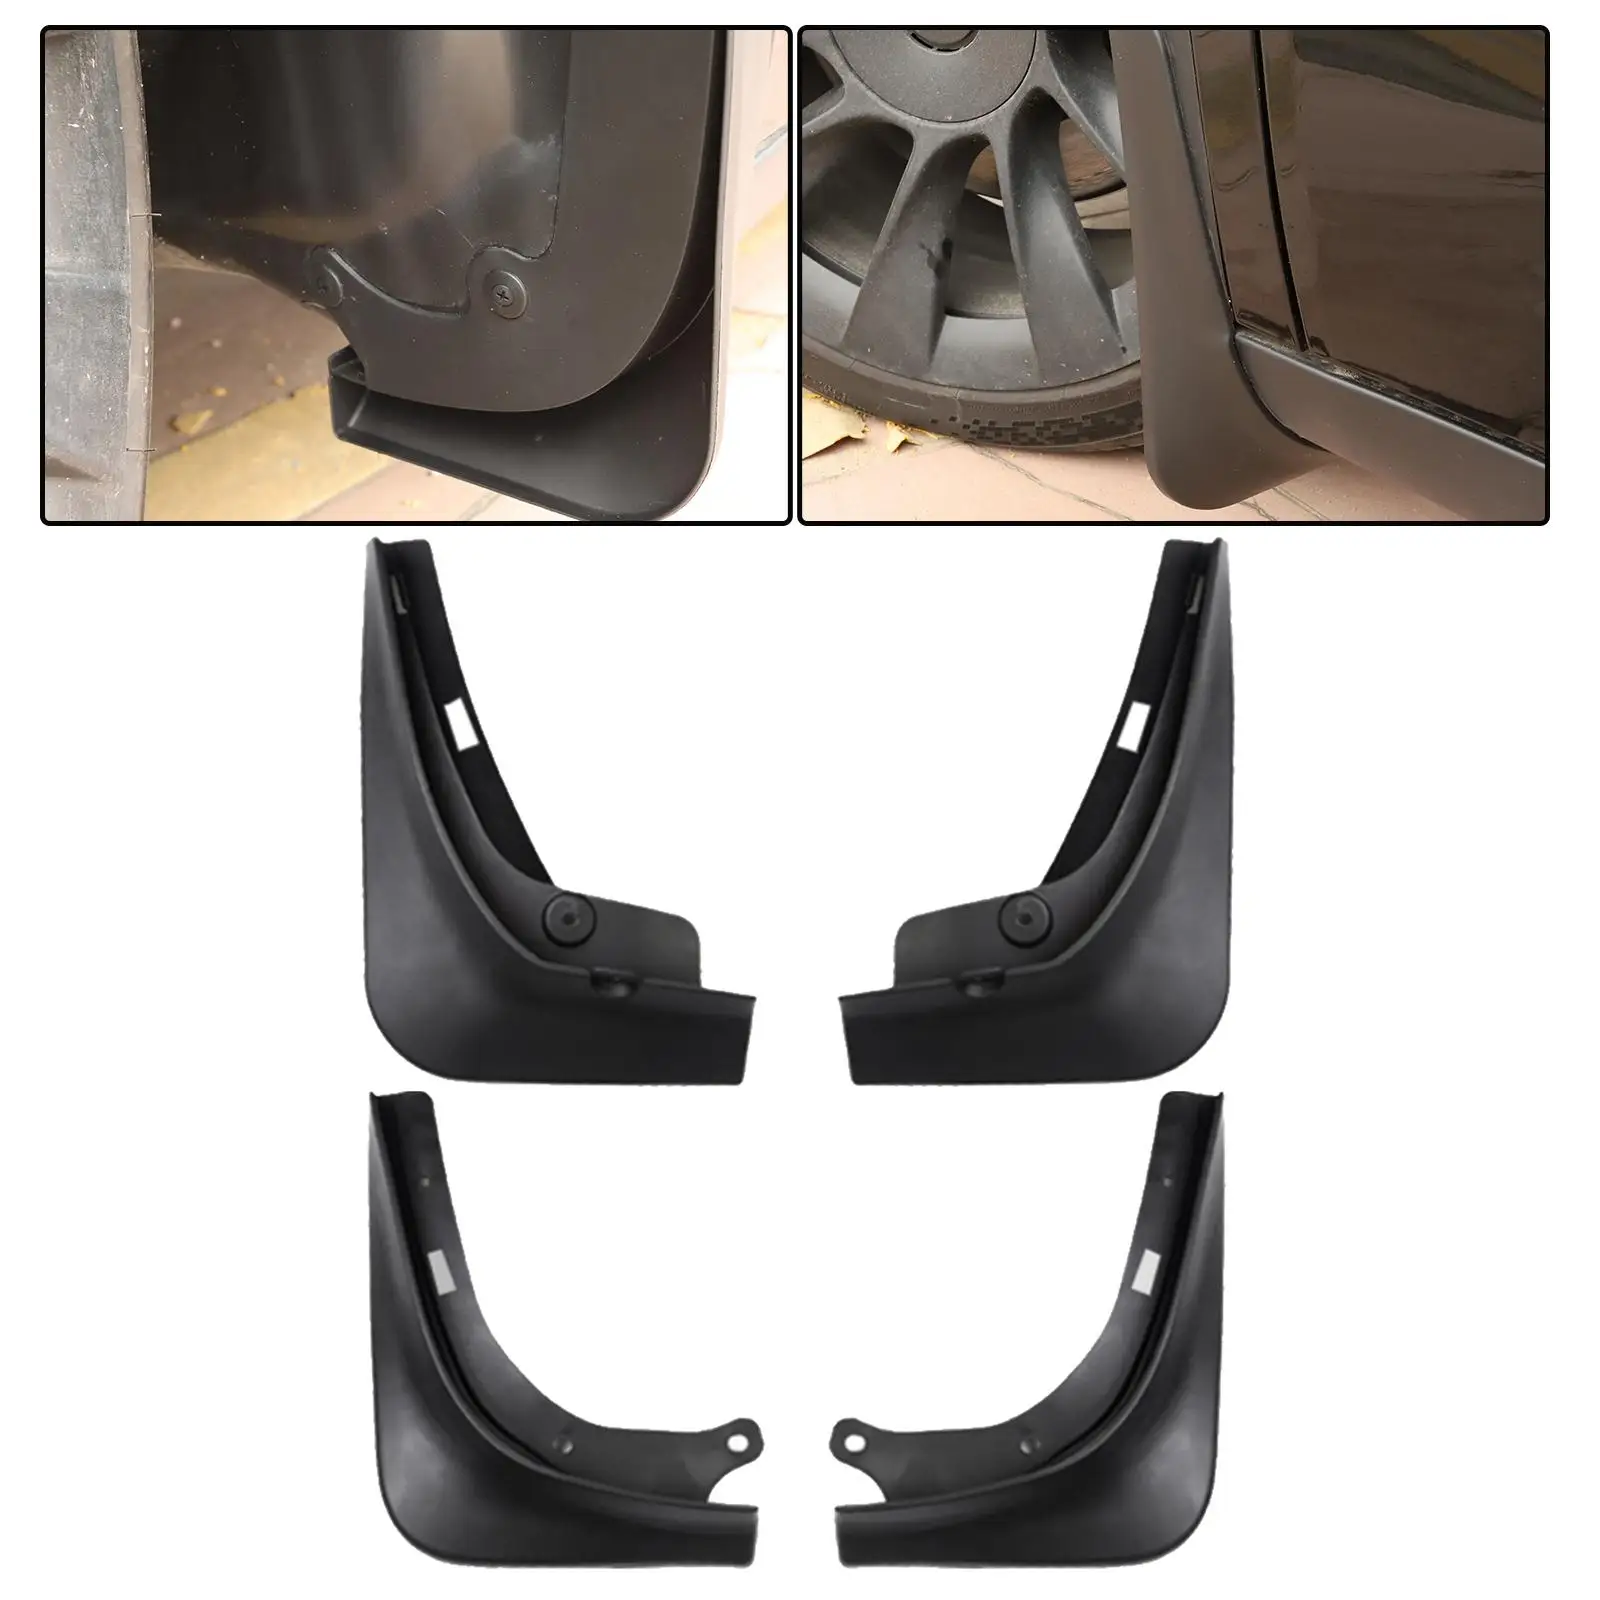 Car Wheel Mud Flaps  for  No Need Drilling Holes